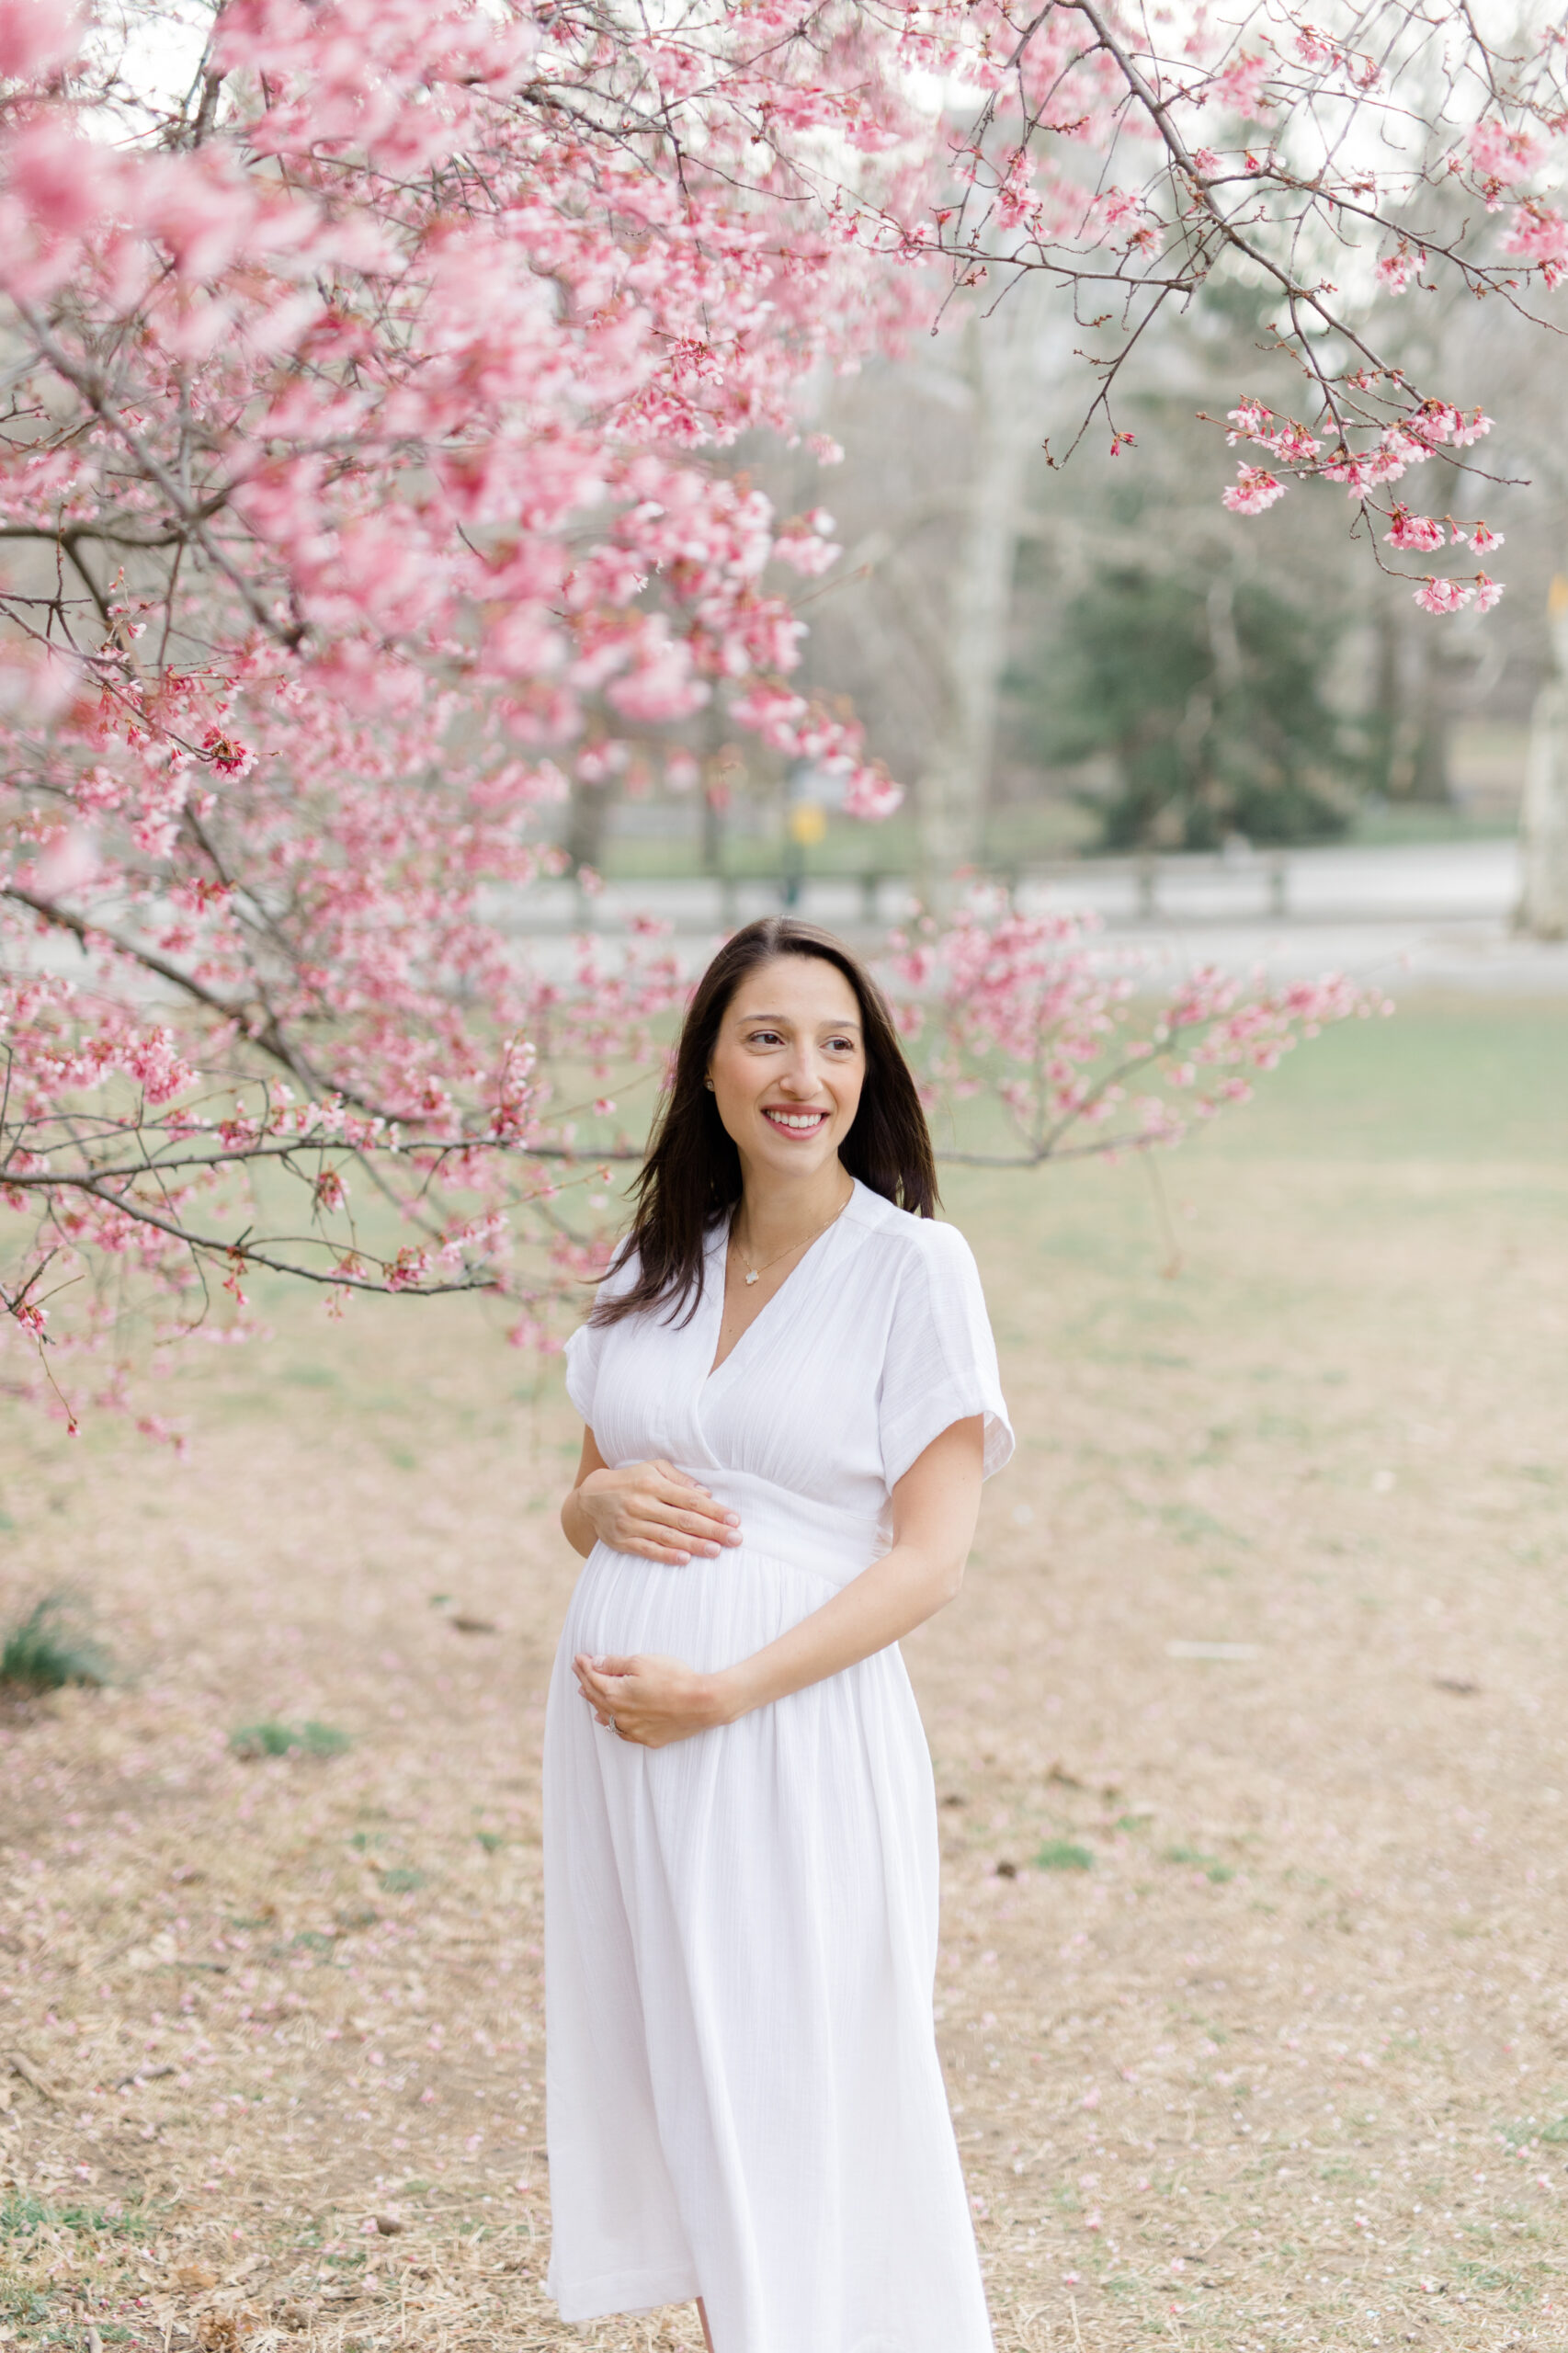 A pregnant woman smiles in front of a pink flowering tree in Central Park at  a New York City maternity photography session with Jacqueline Clair Photography